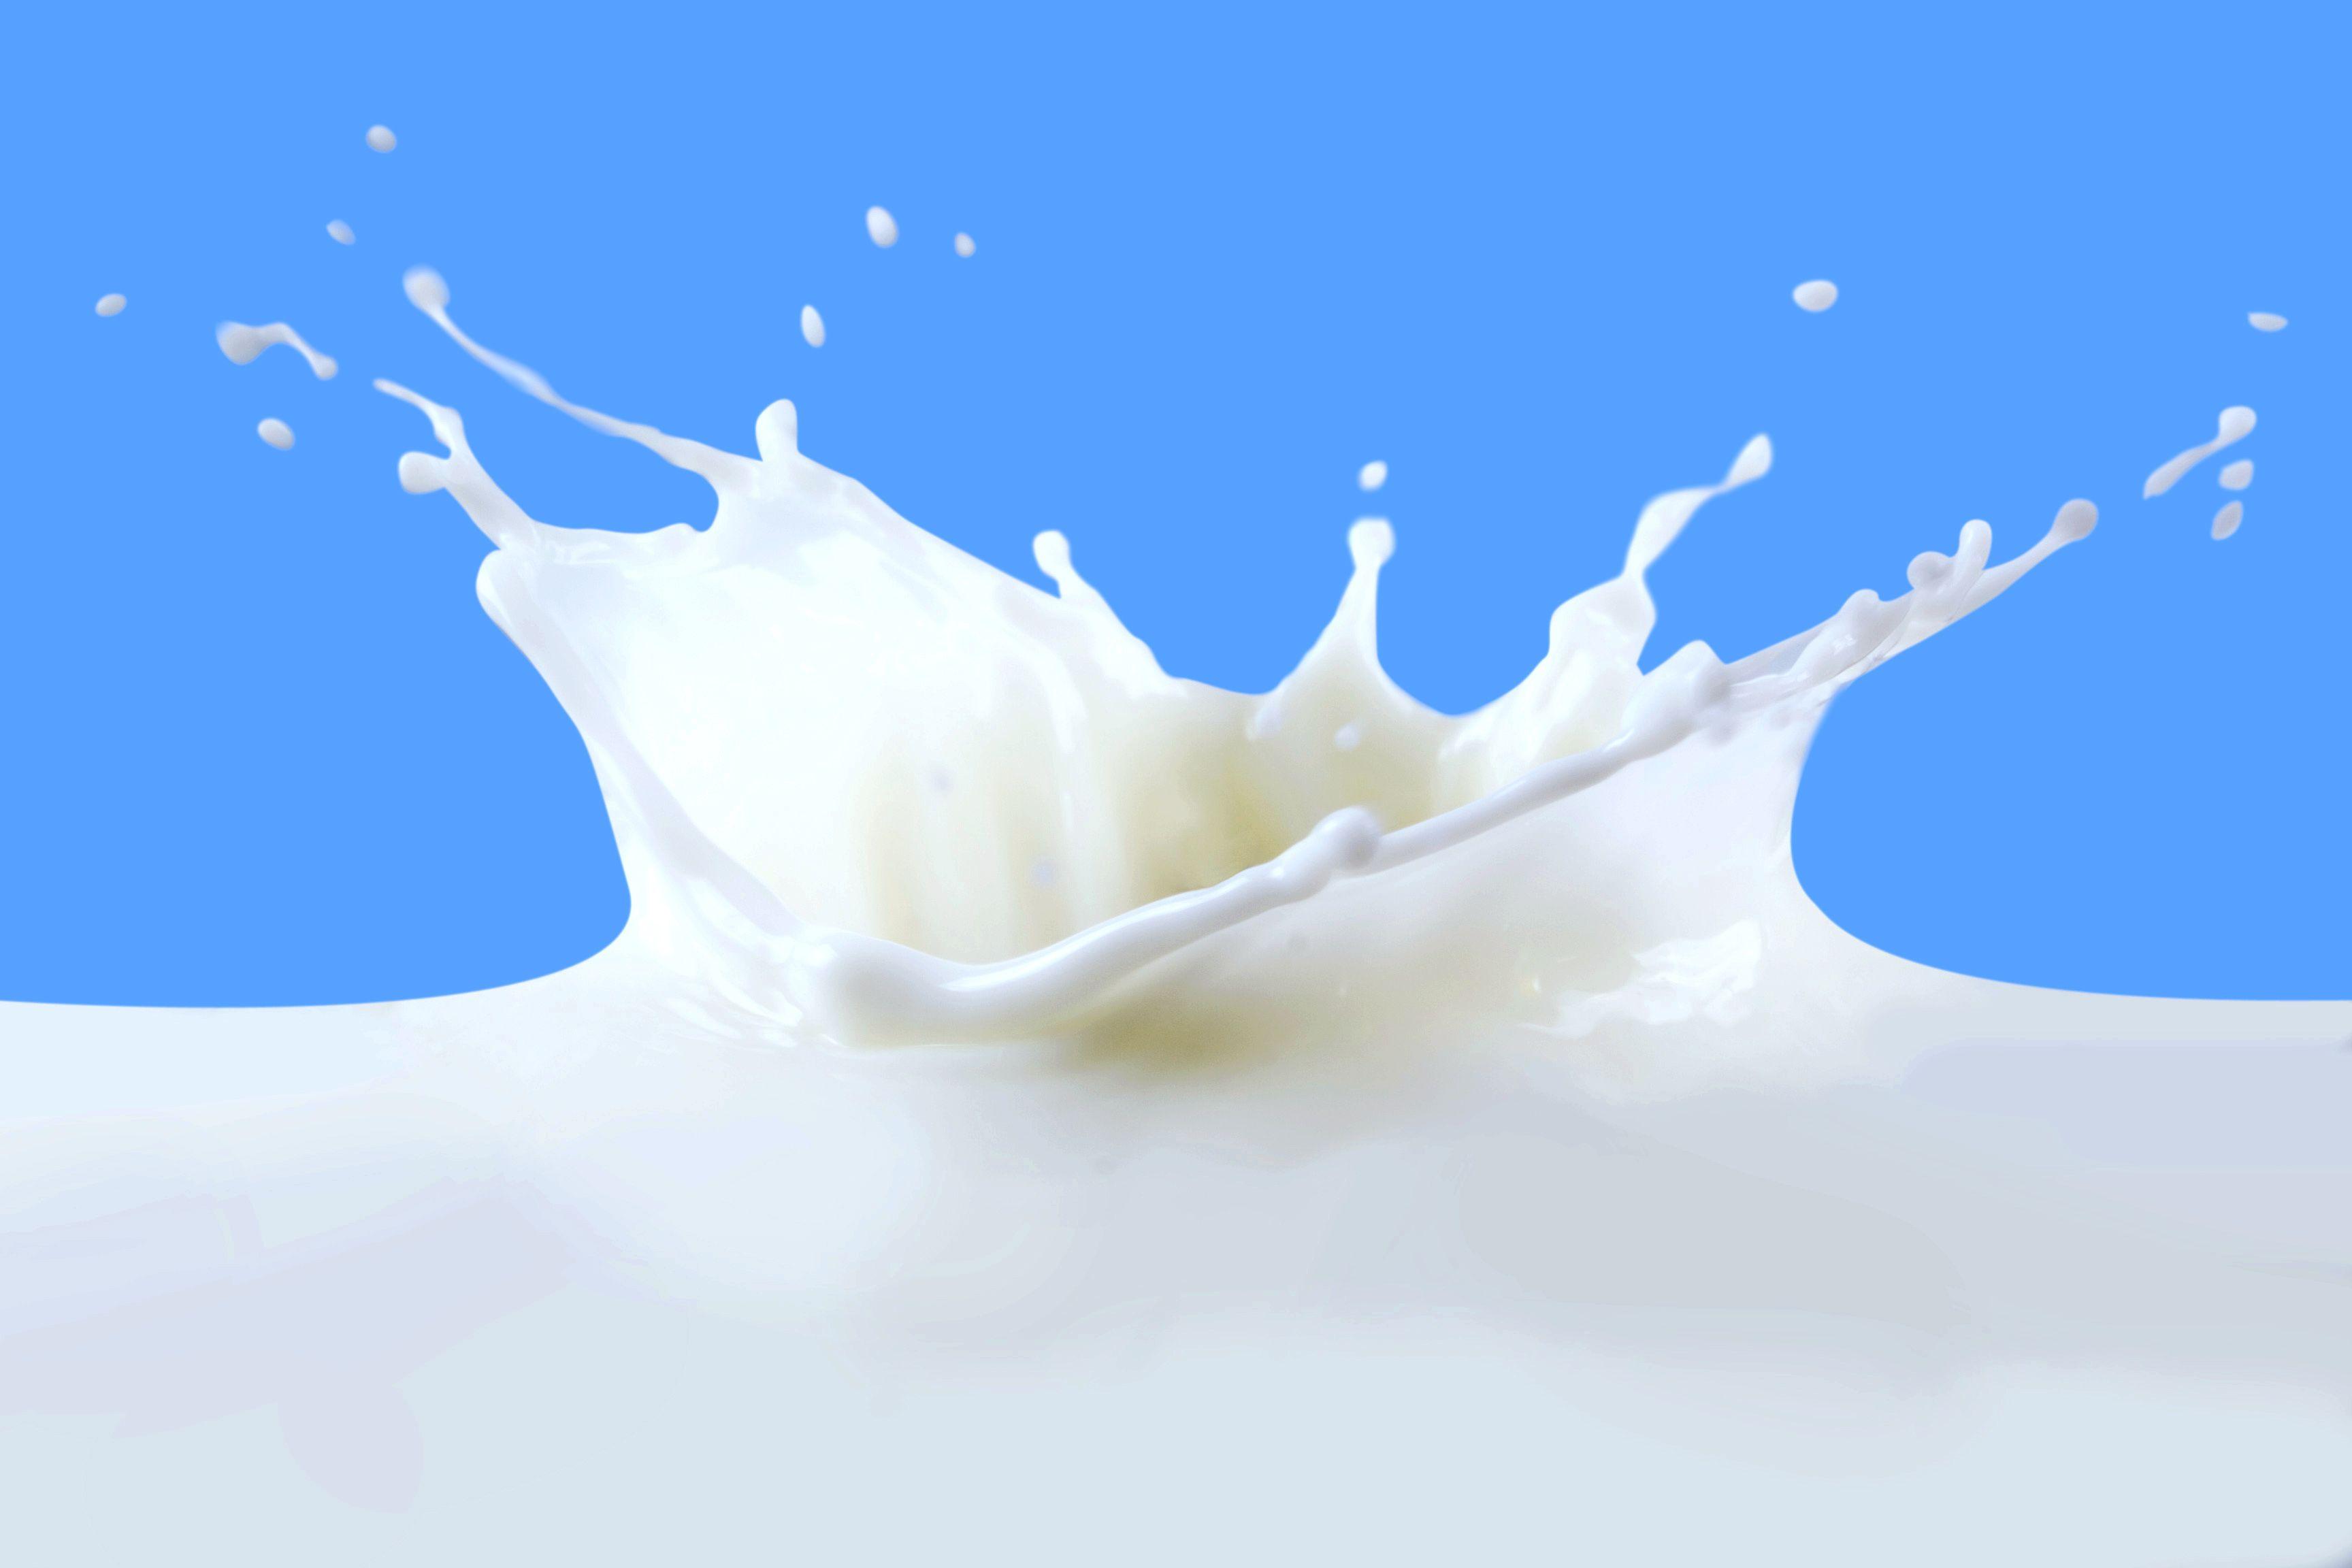 HD Milk Wallpaper and Photo. HD Food and Drink Wallpaper